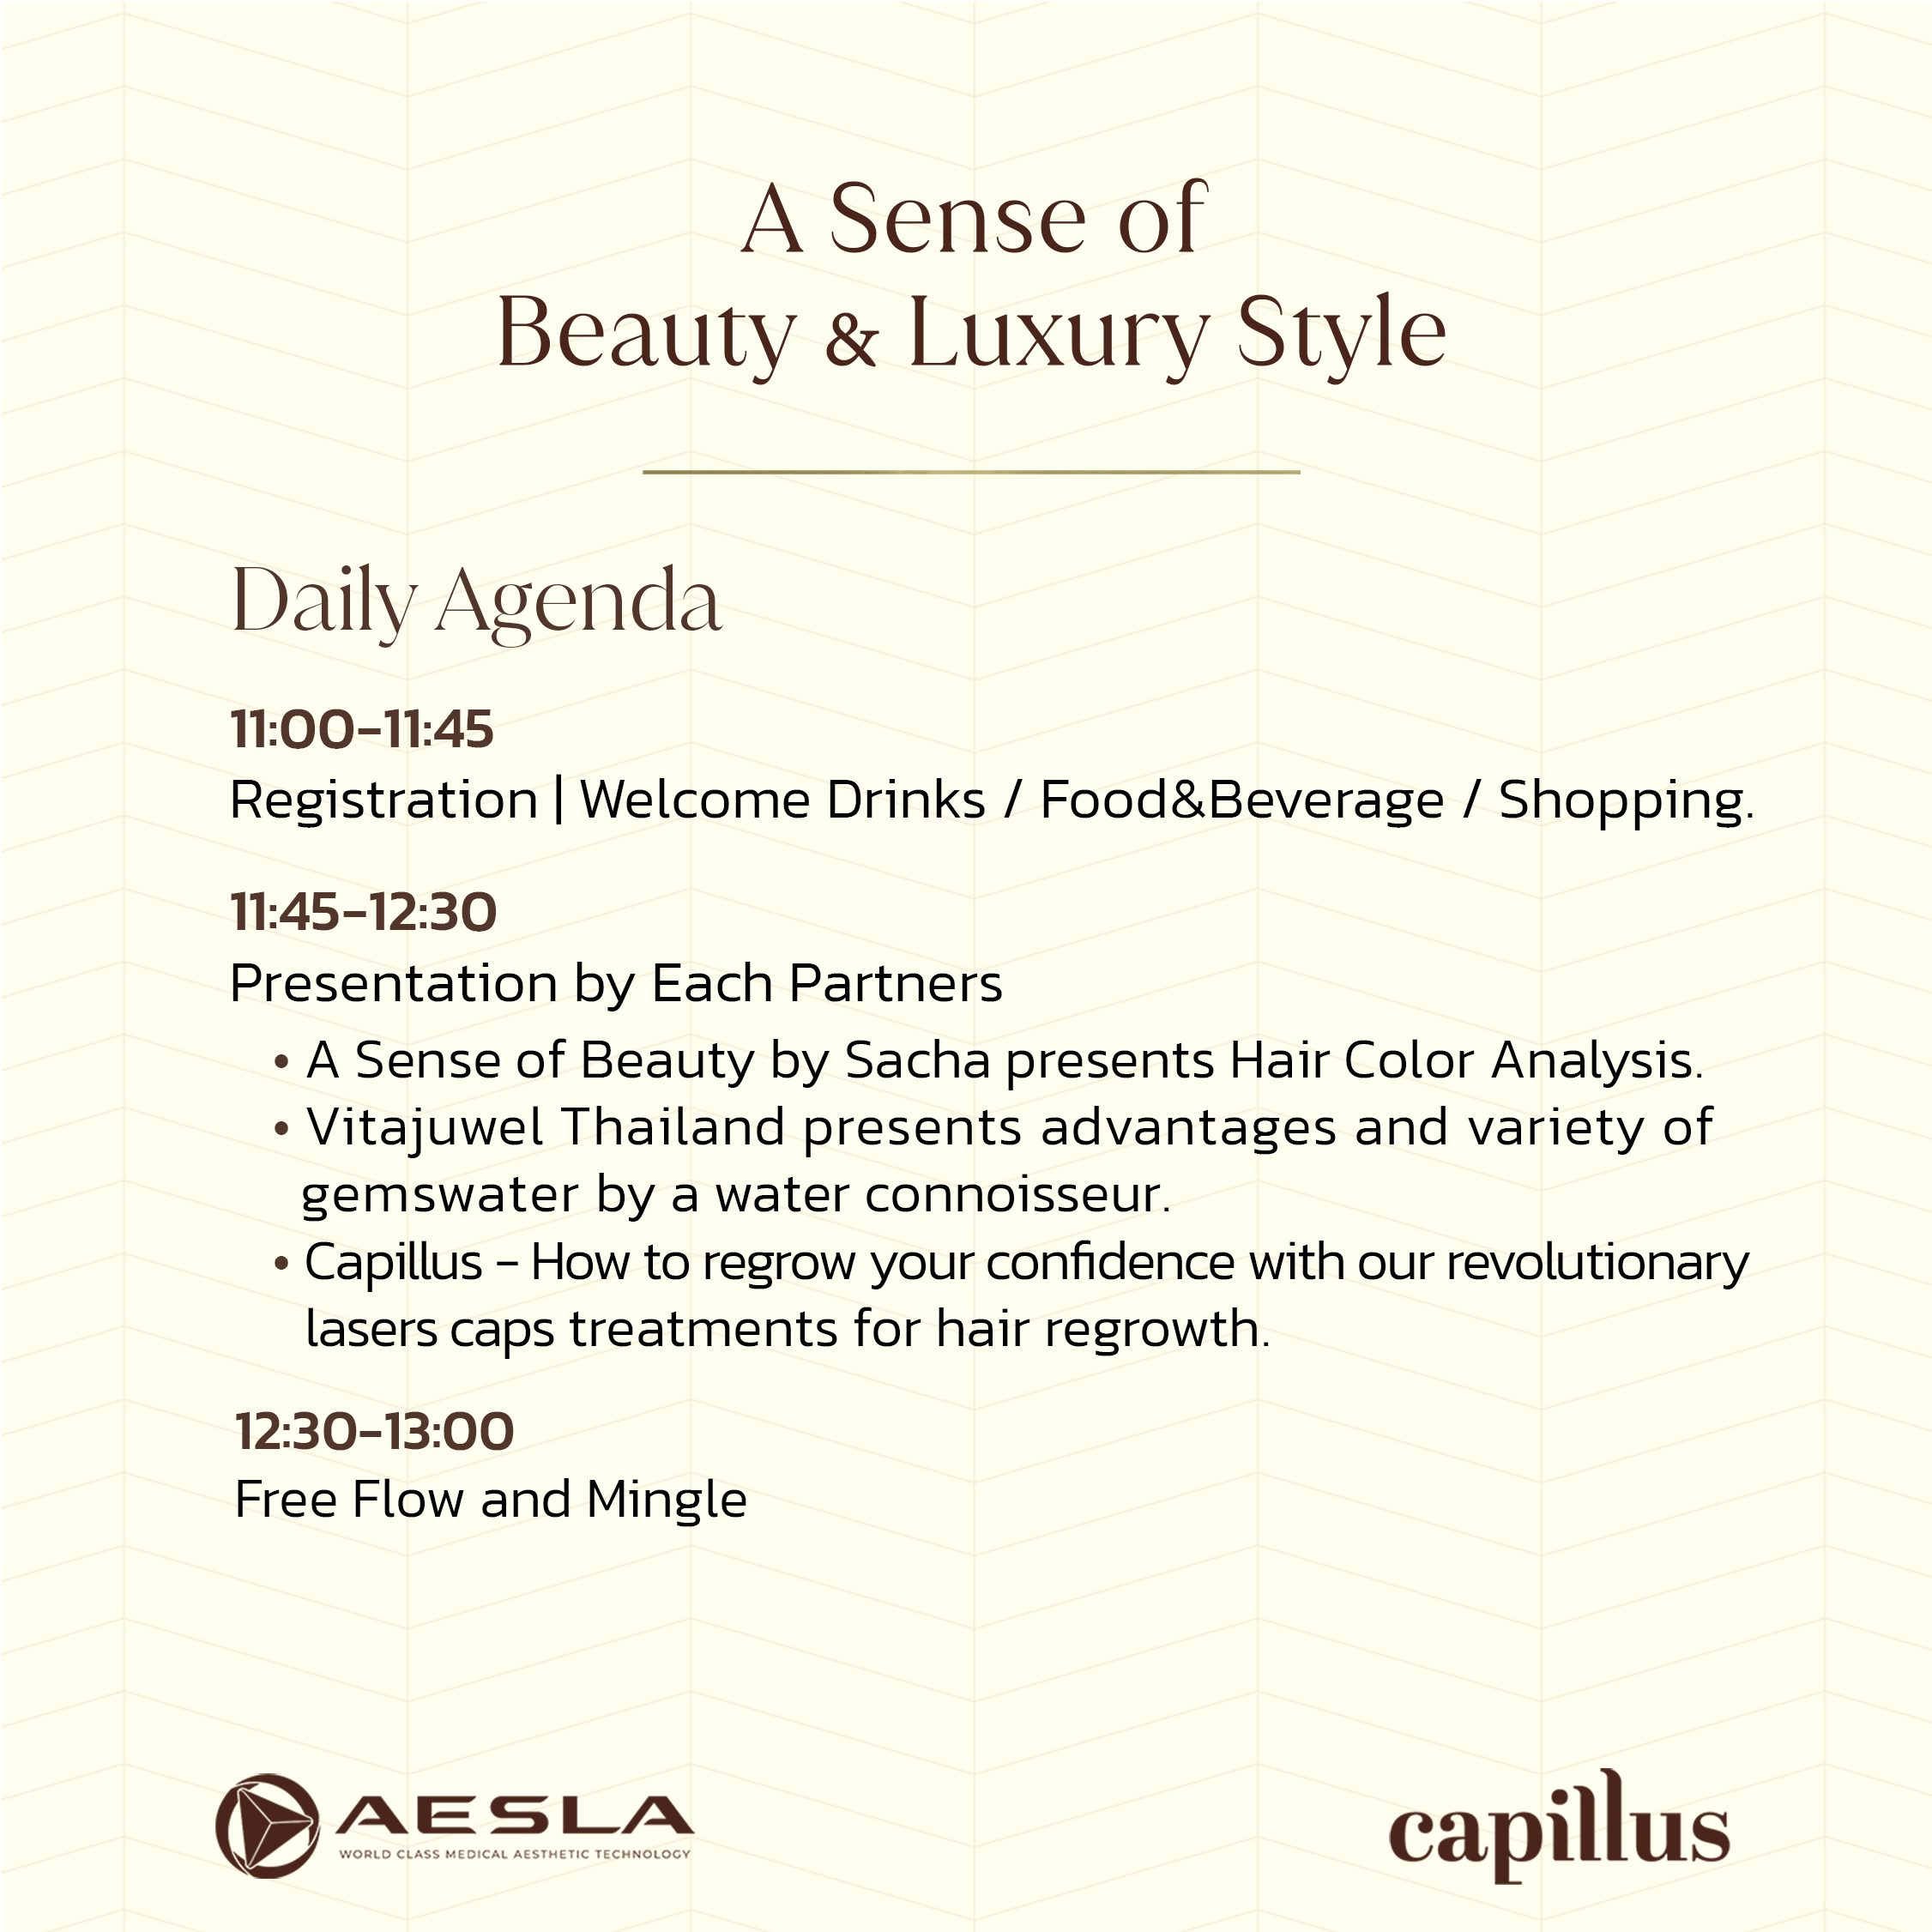 A Sense of Beauty & Luxury Style event